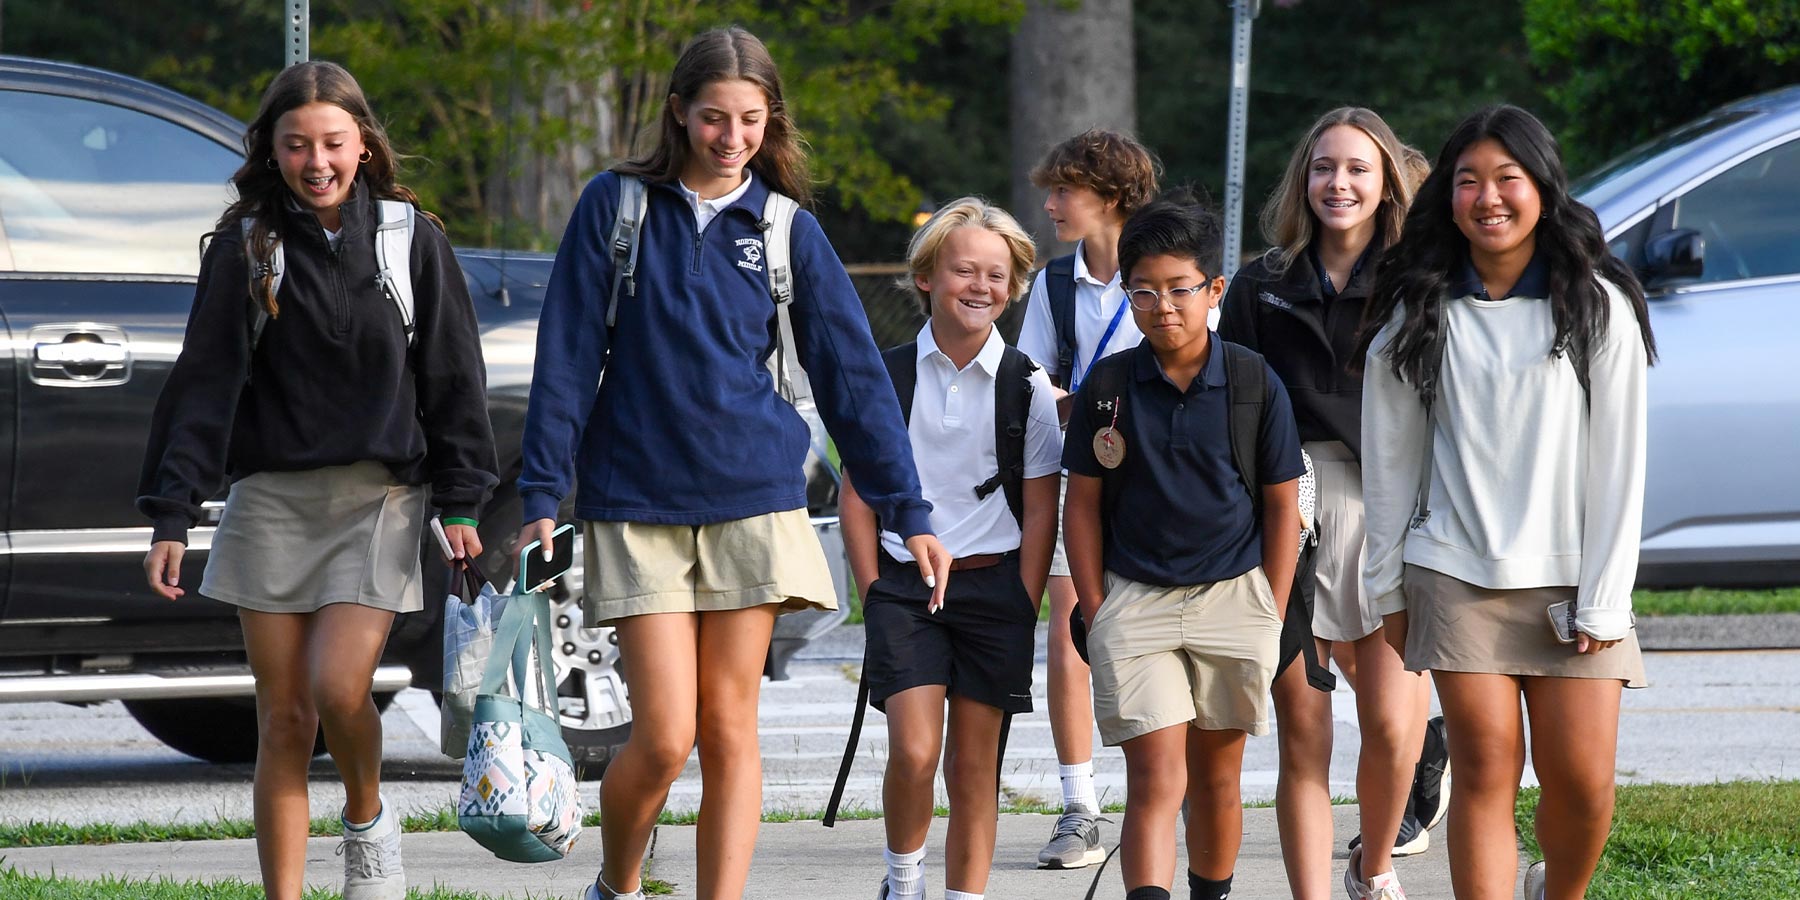 Middle school students walking together